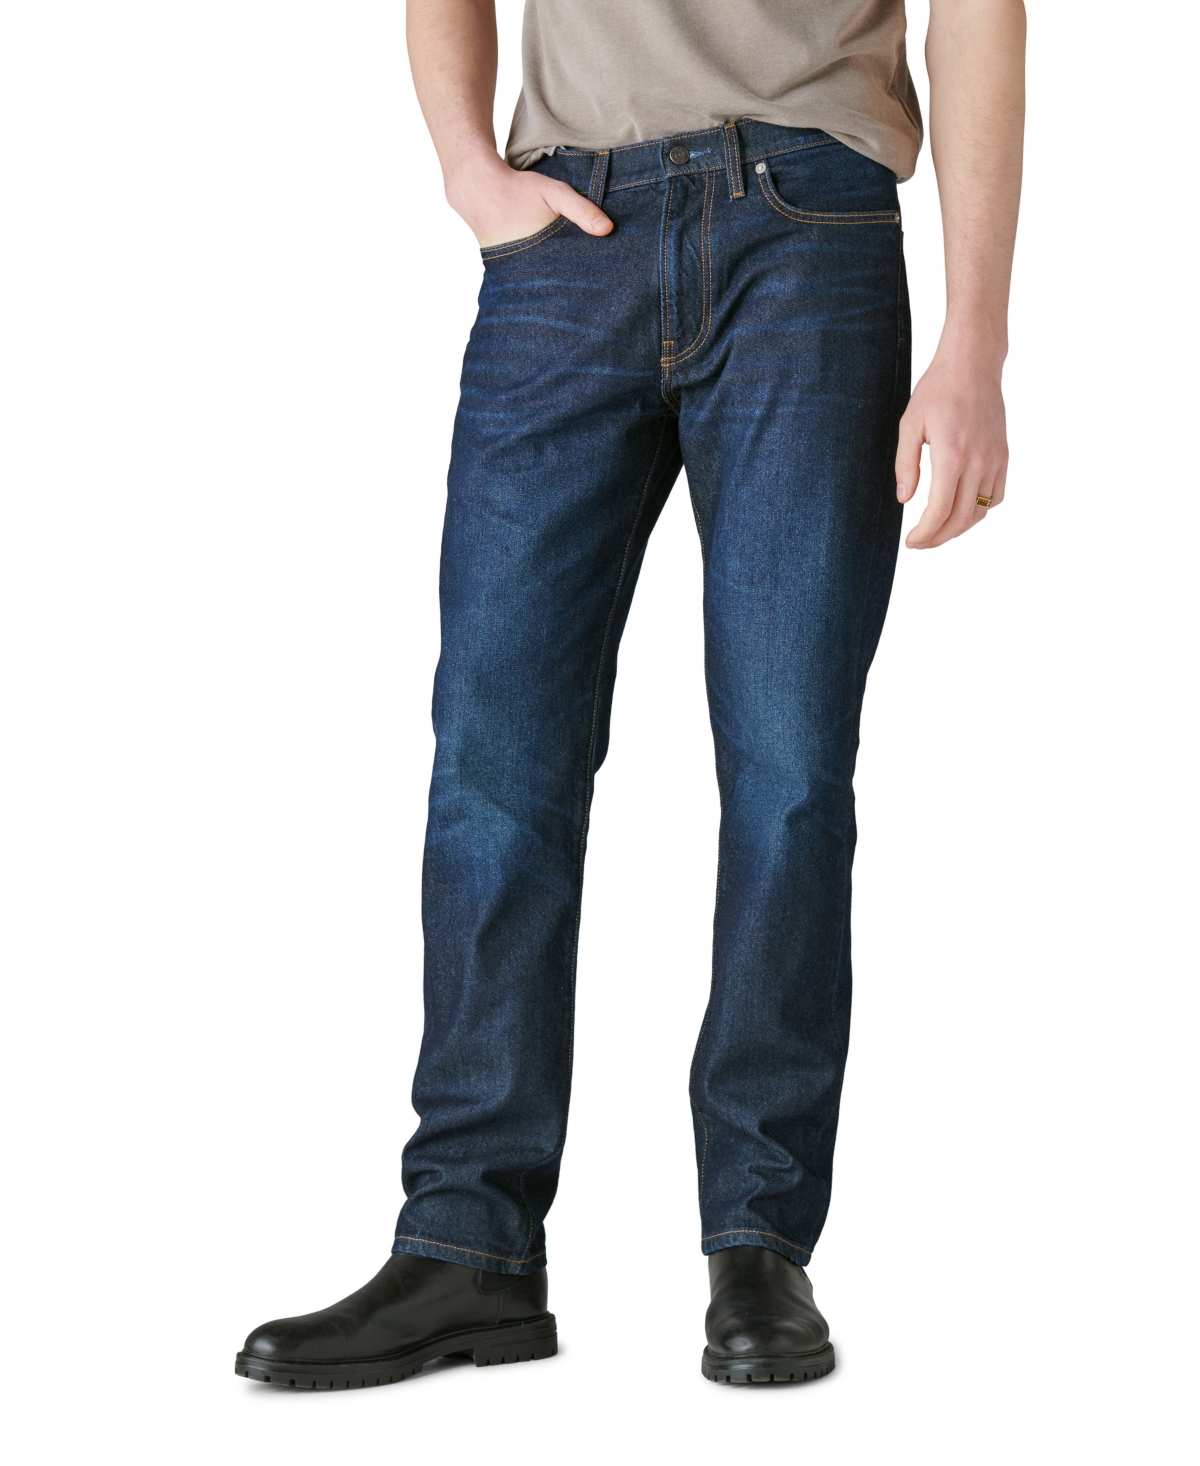 LUCKY BRAND MEN'S 410 ATHLETIC STRAIGHT JEANS